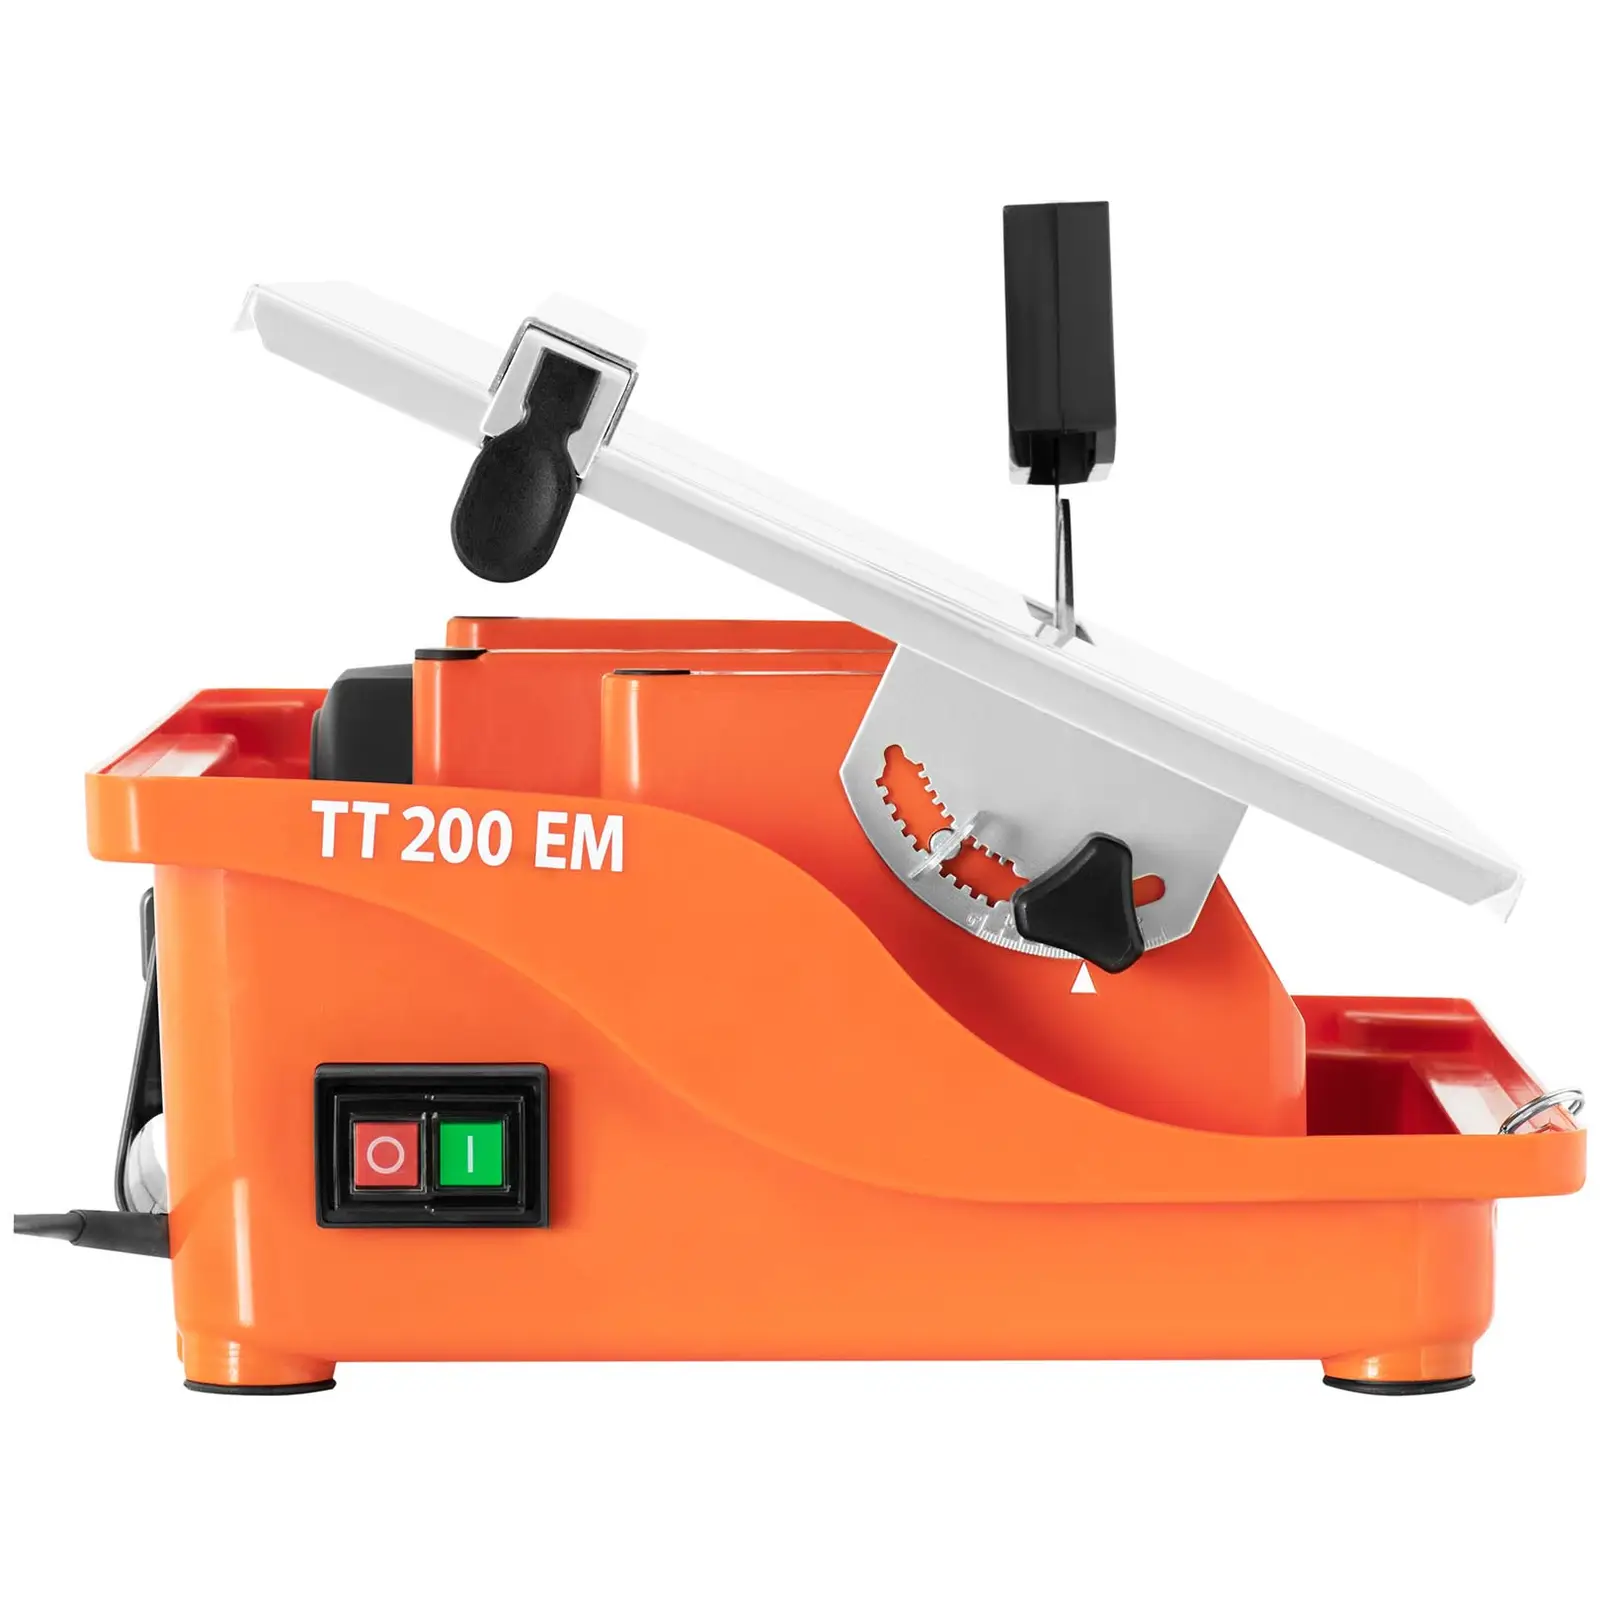 Tile Cutter - 800 W - tiltable stainless steel table from 0 - 45° - water cooling